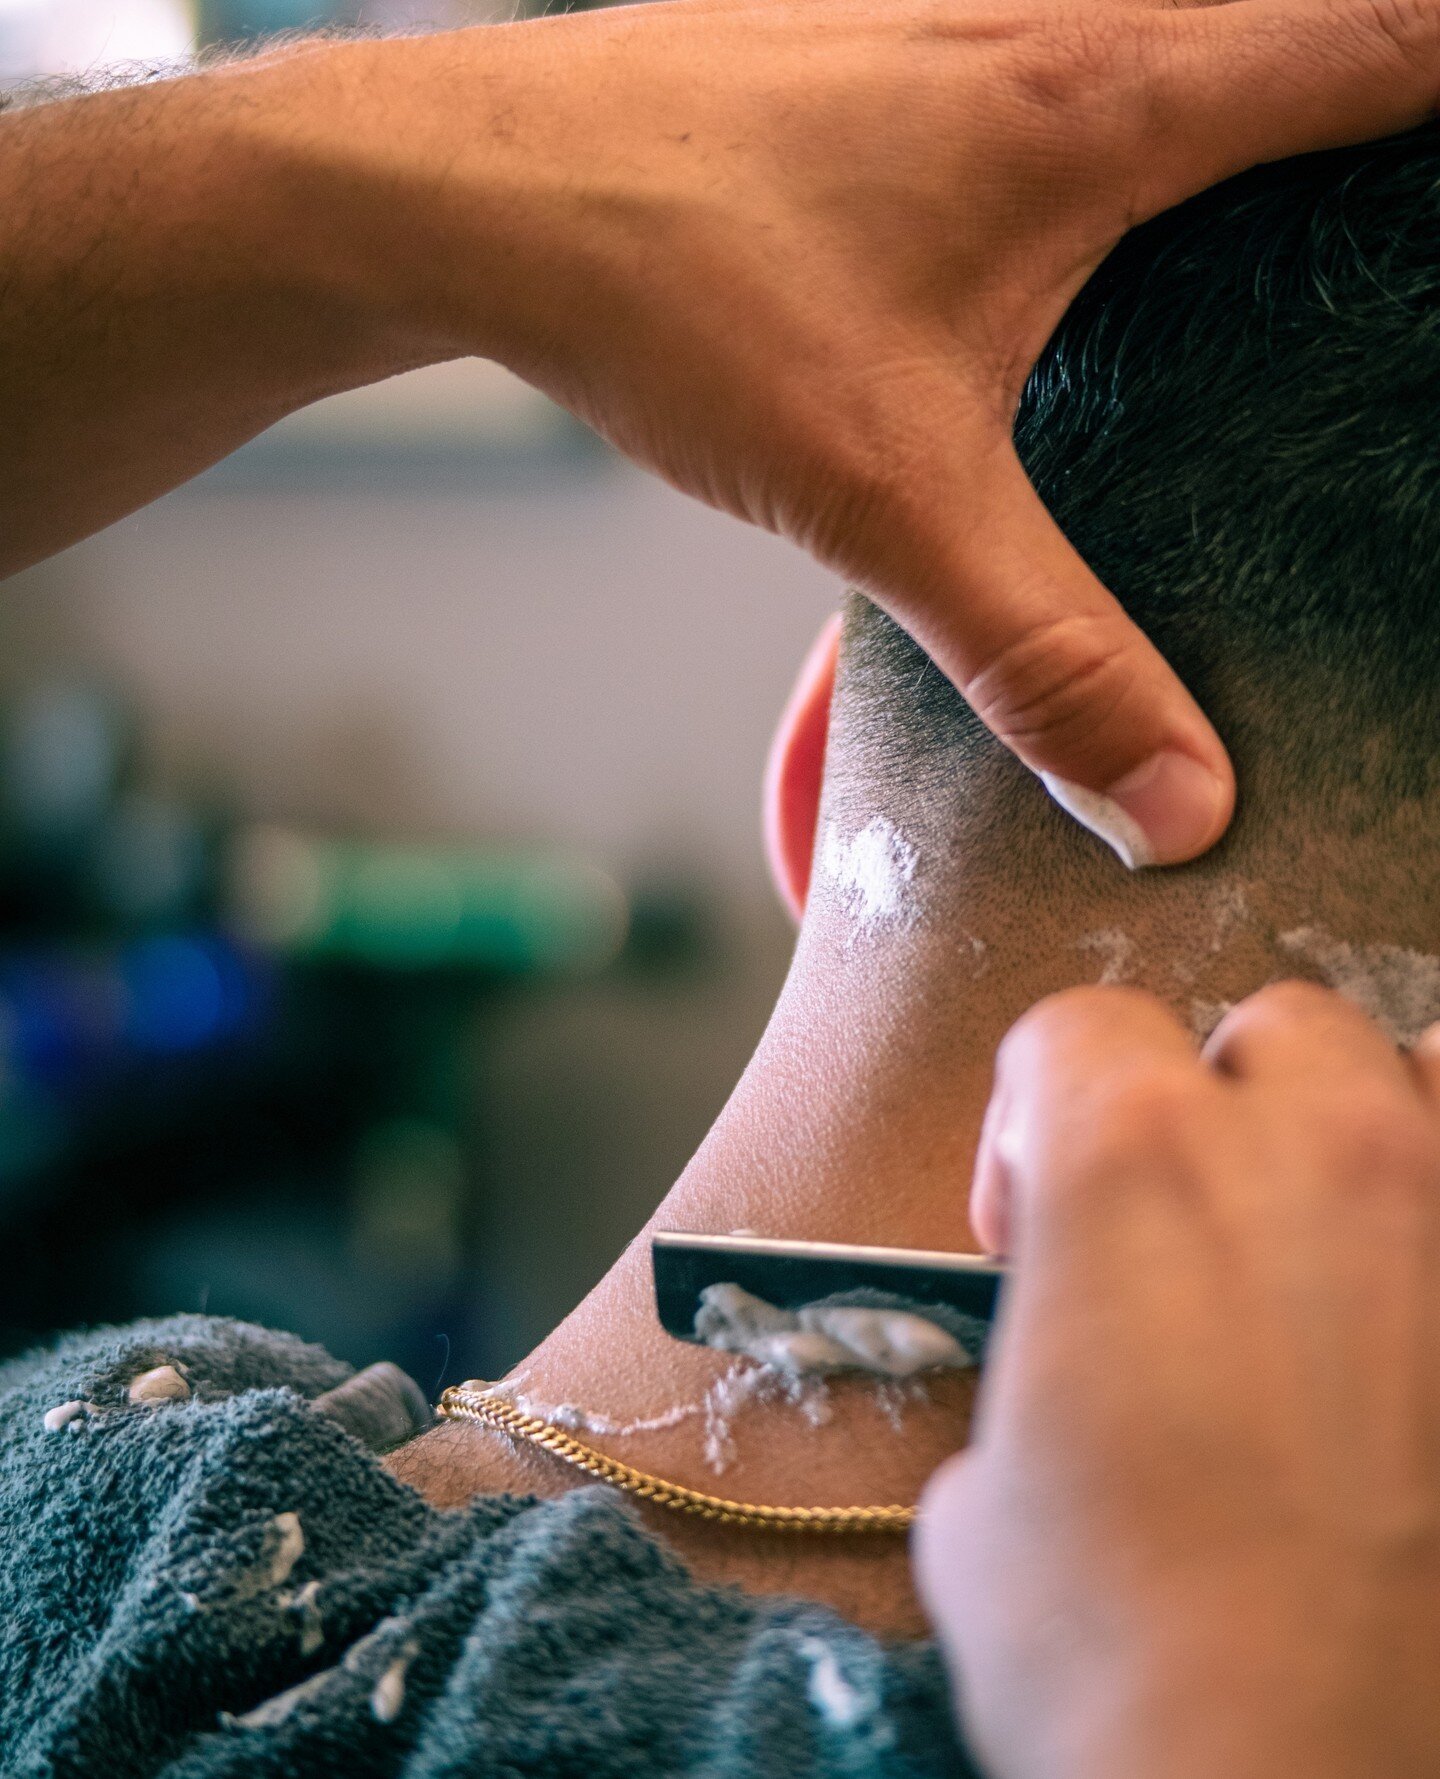 Progress starts with clean lines, and feeling good starts with clean shaves! We hope you find your success this week with a clean shave and fresh cut from Tame the Mane.⁠
⁠
#menshair #freshshave #feelinggood #staymanetamed #barbershop #haircut #Wilmi